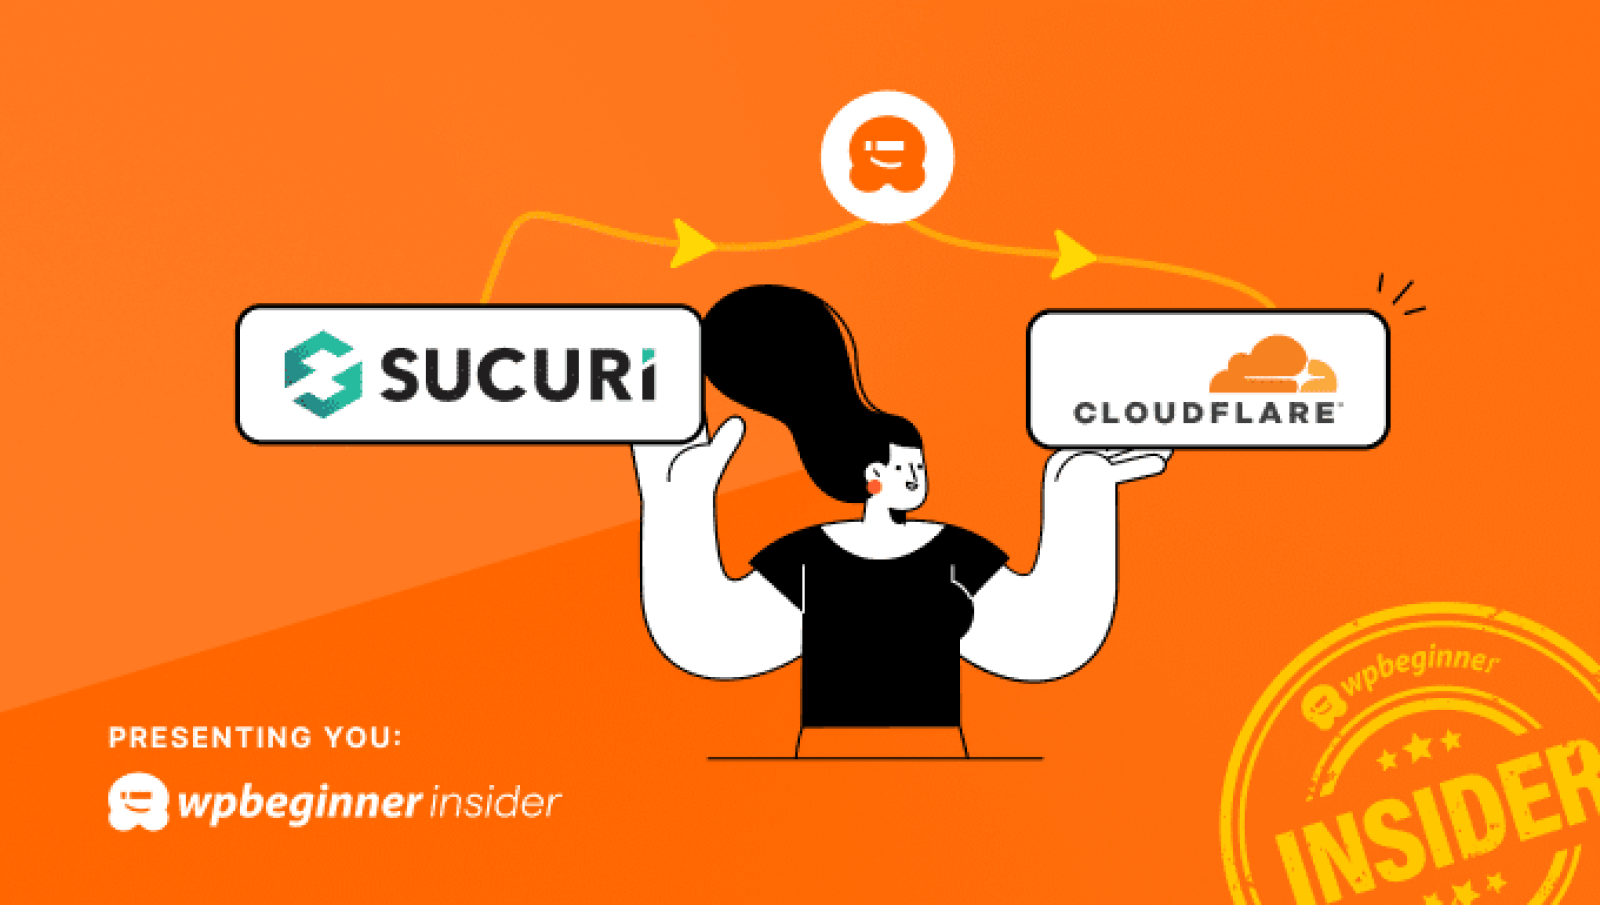 5 Causes Why WPBeginner Switched From Sucuri to Cloudflare